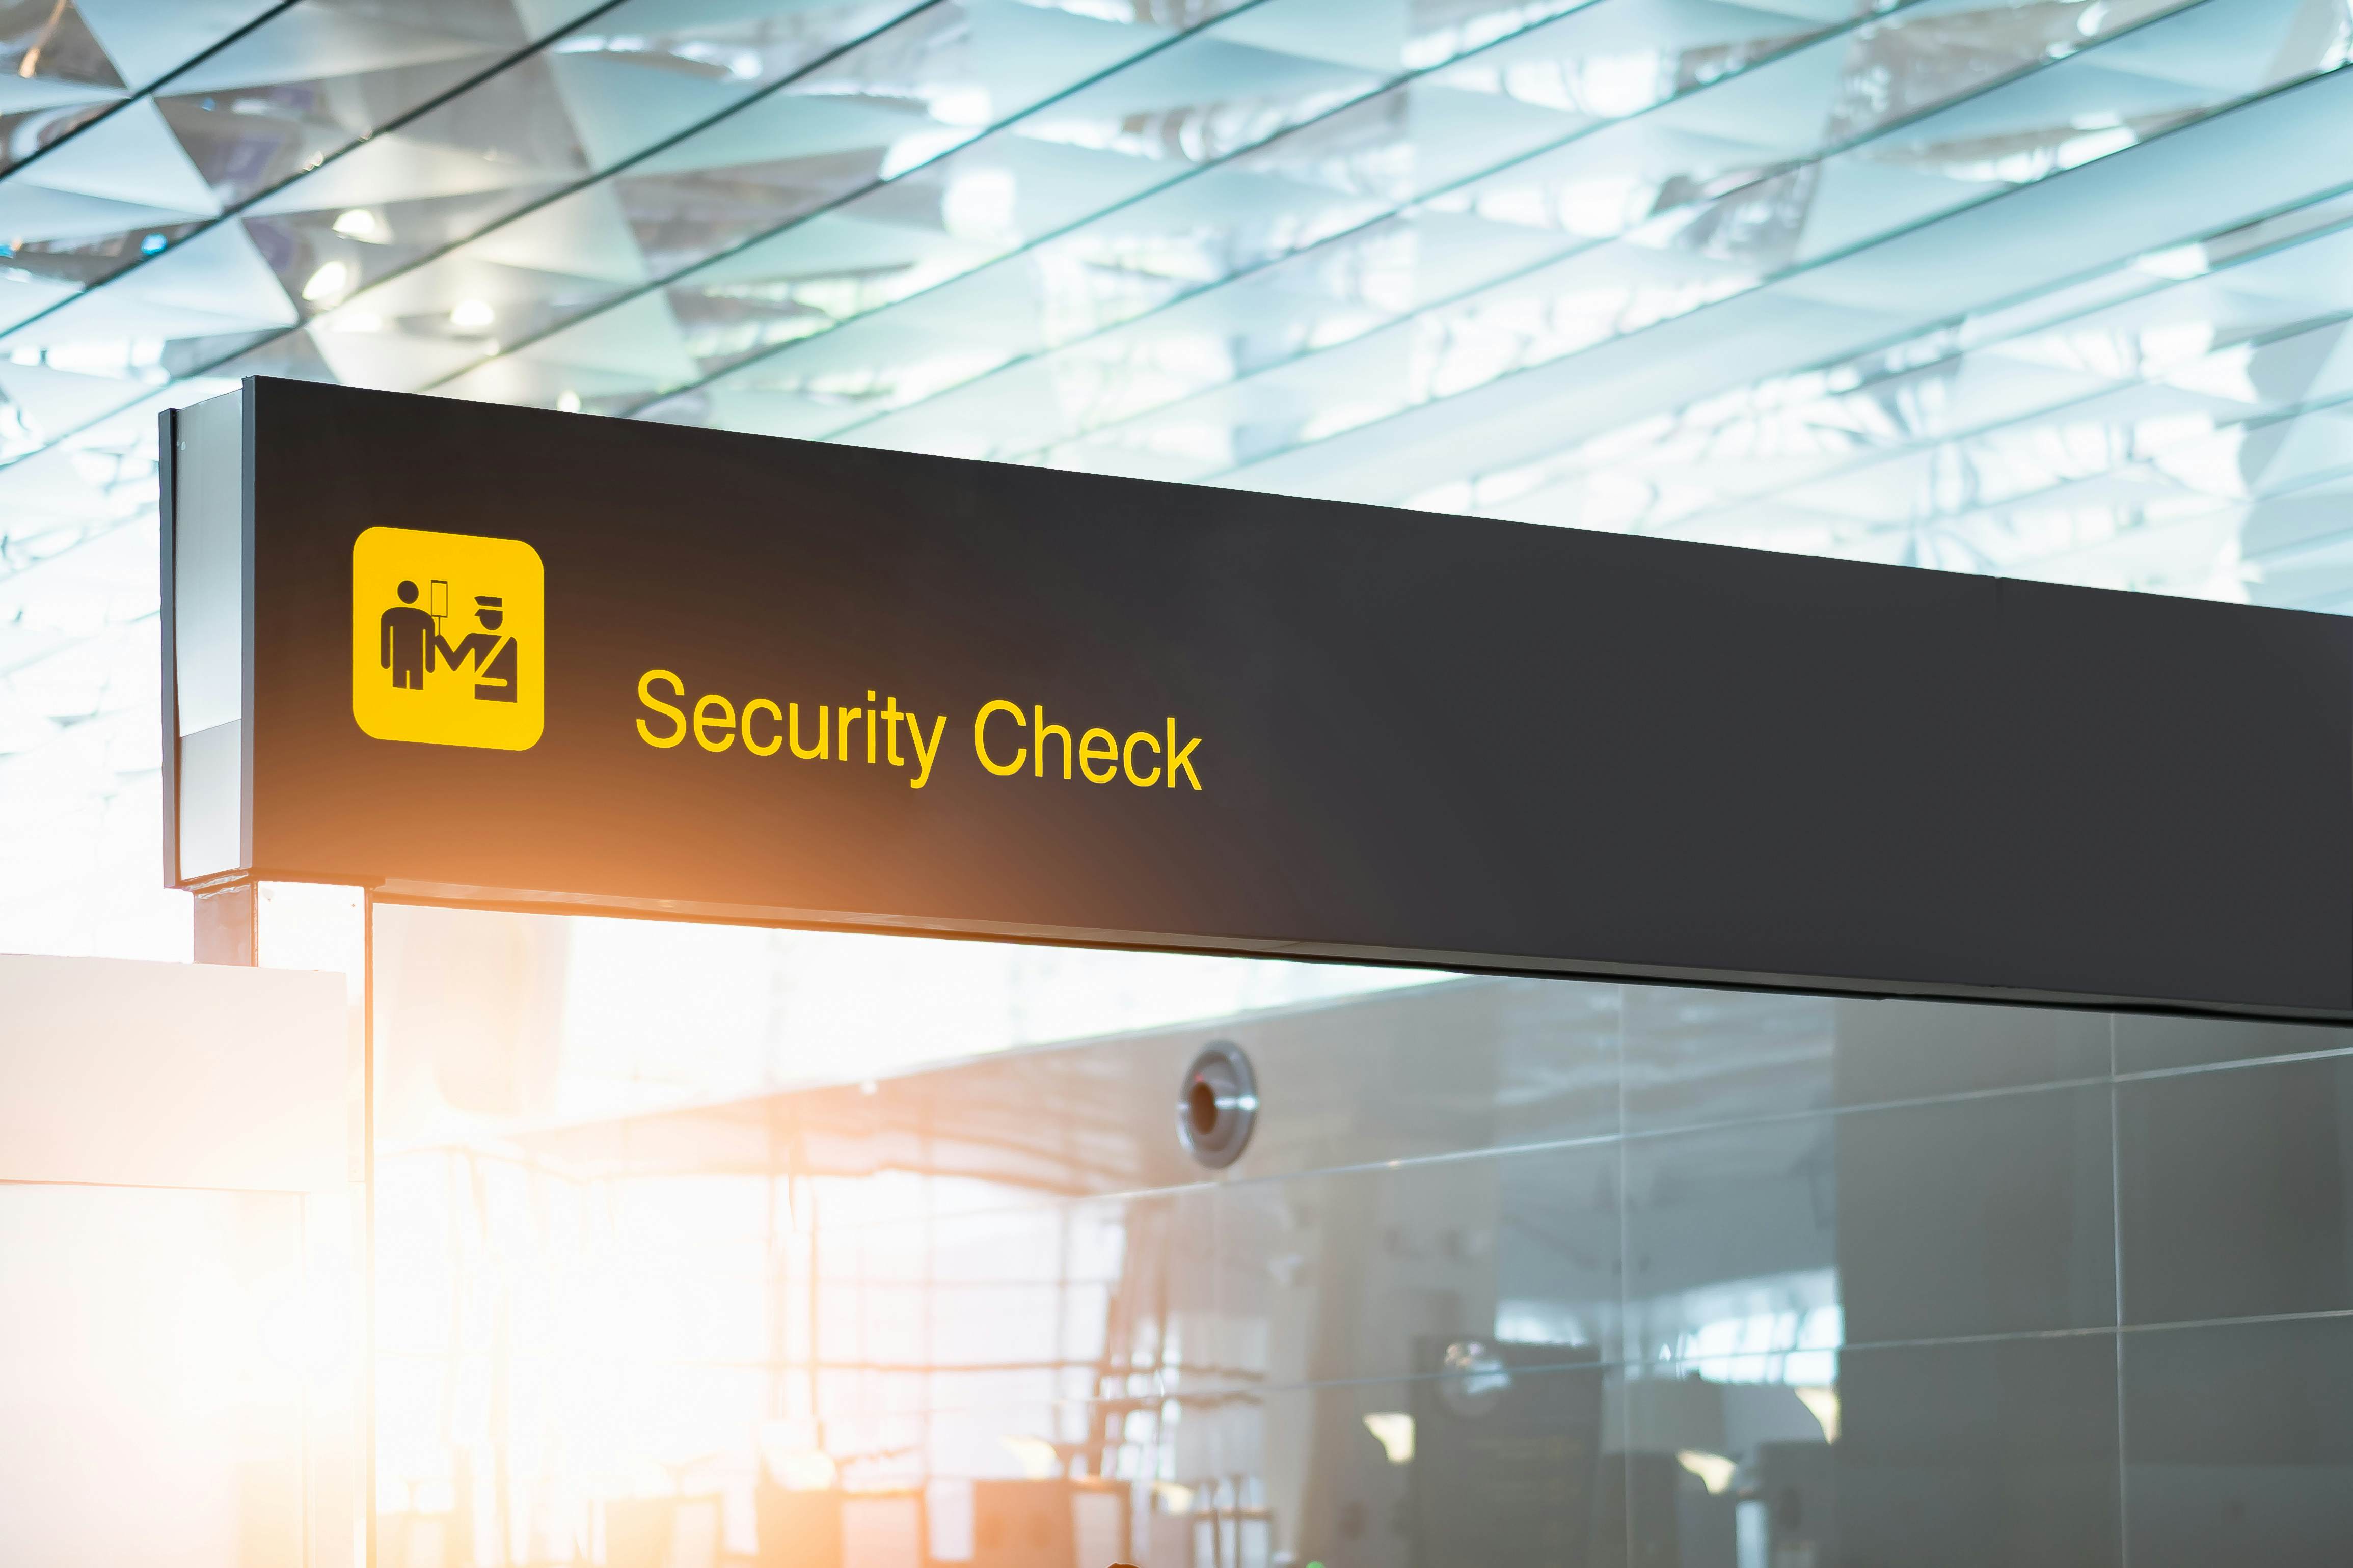 How to go through airport security smoothly